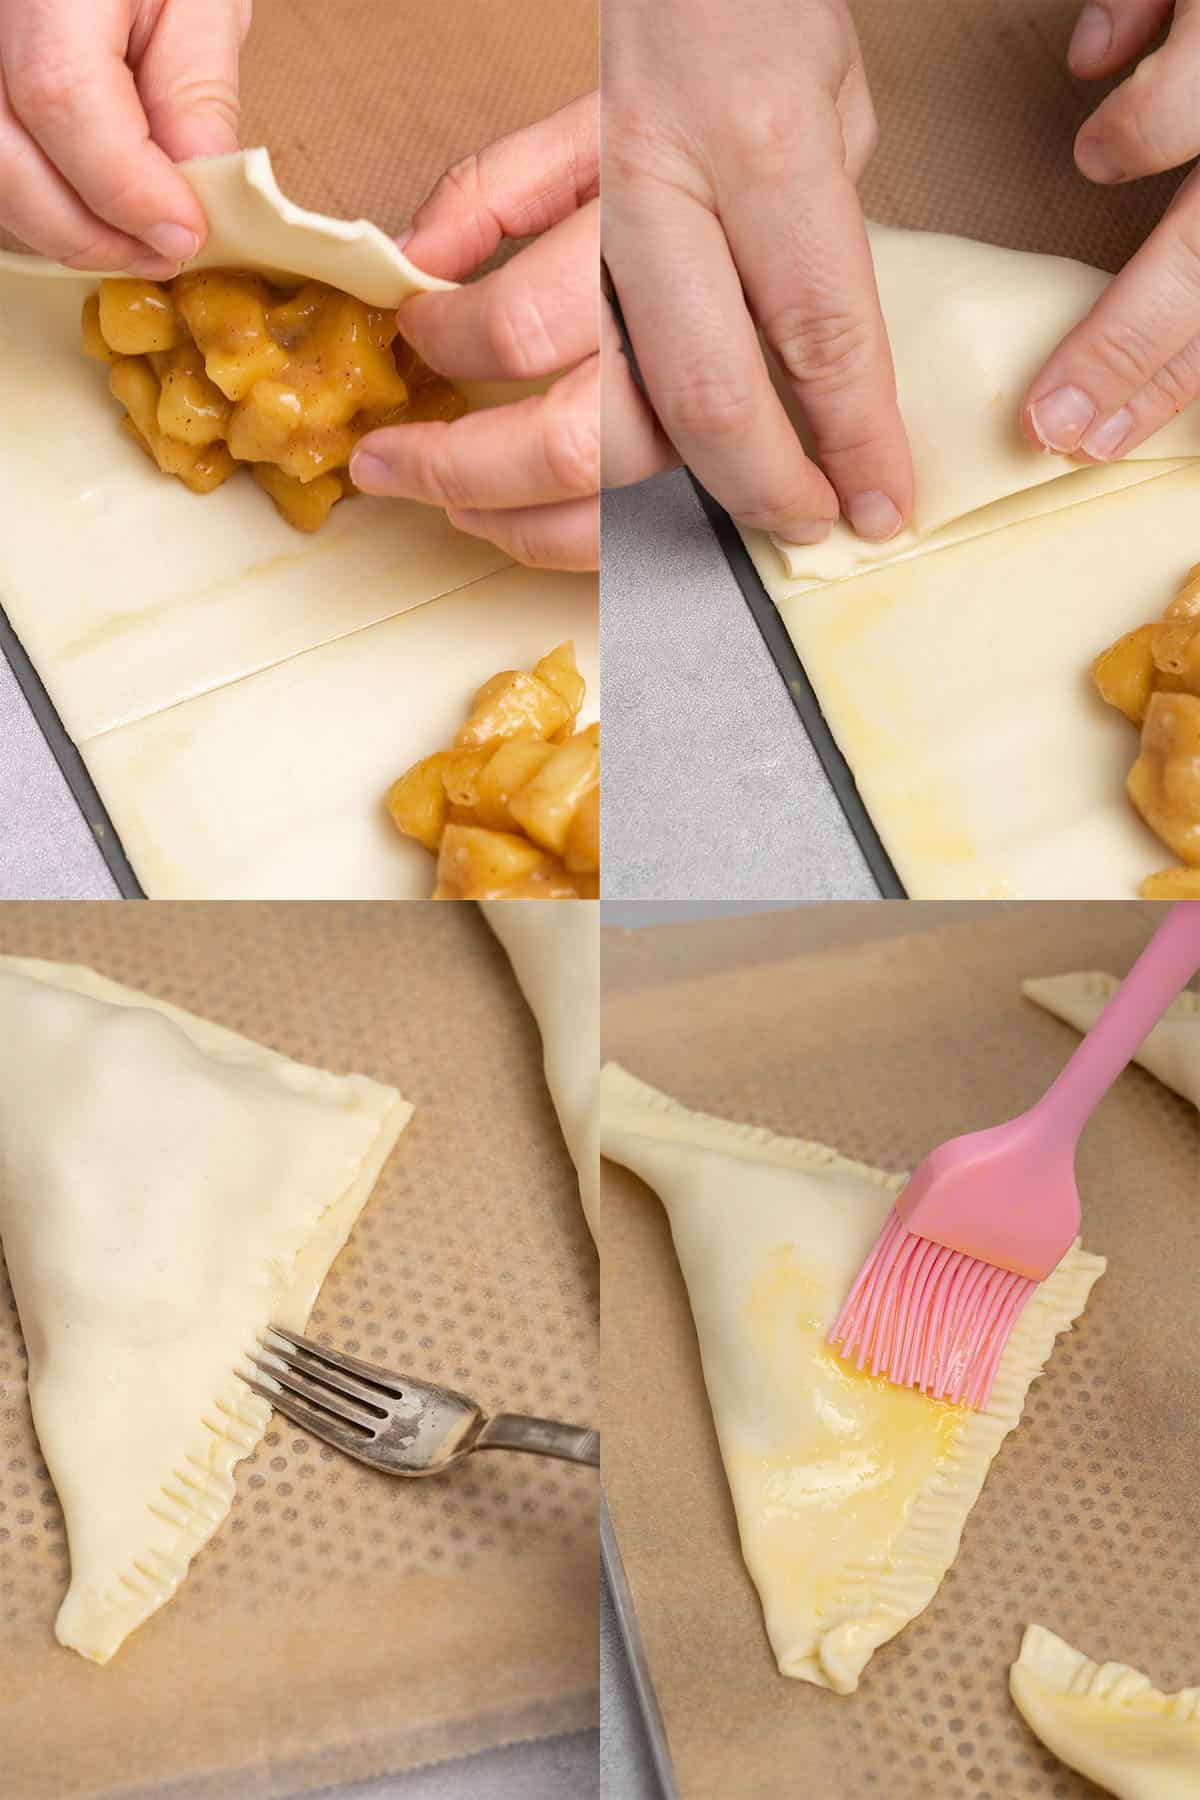 Apple turnover step-by-step process.